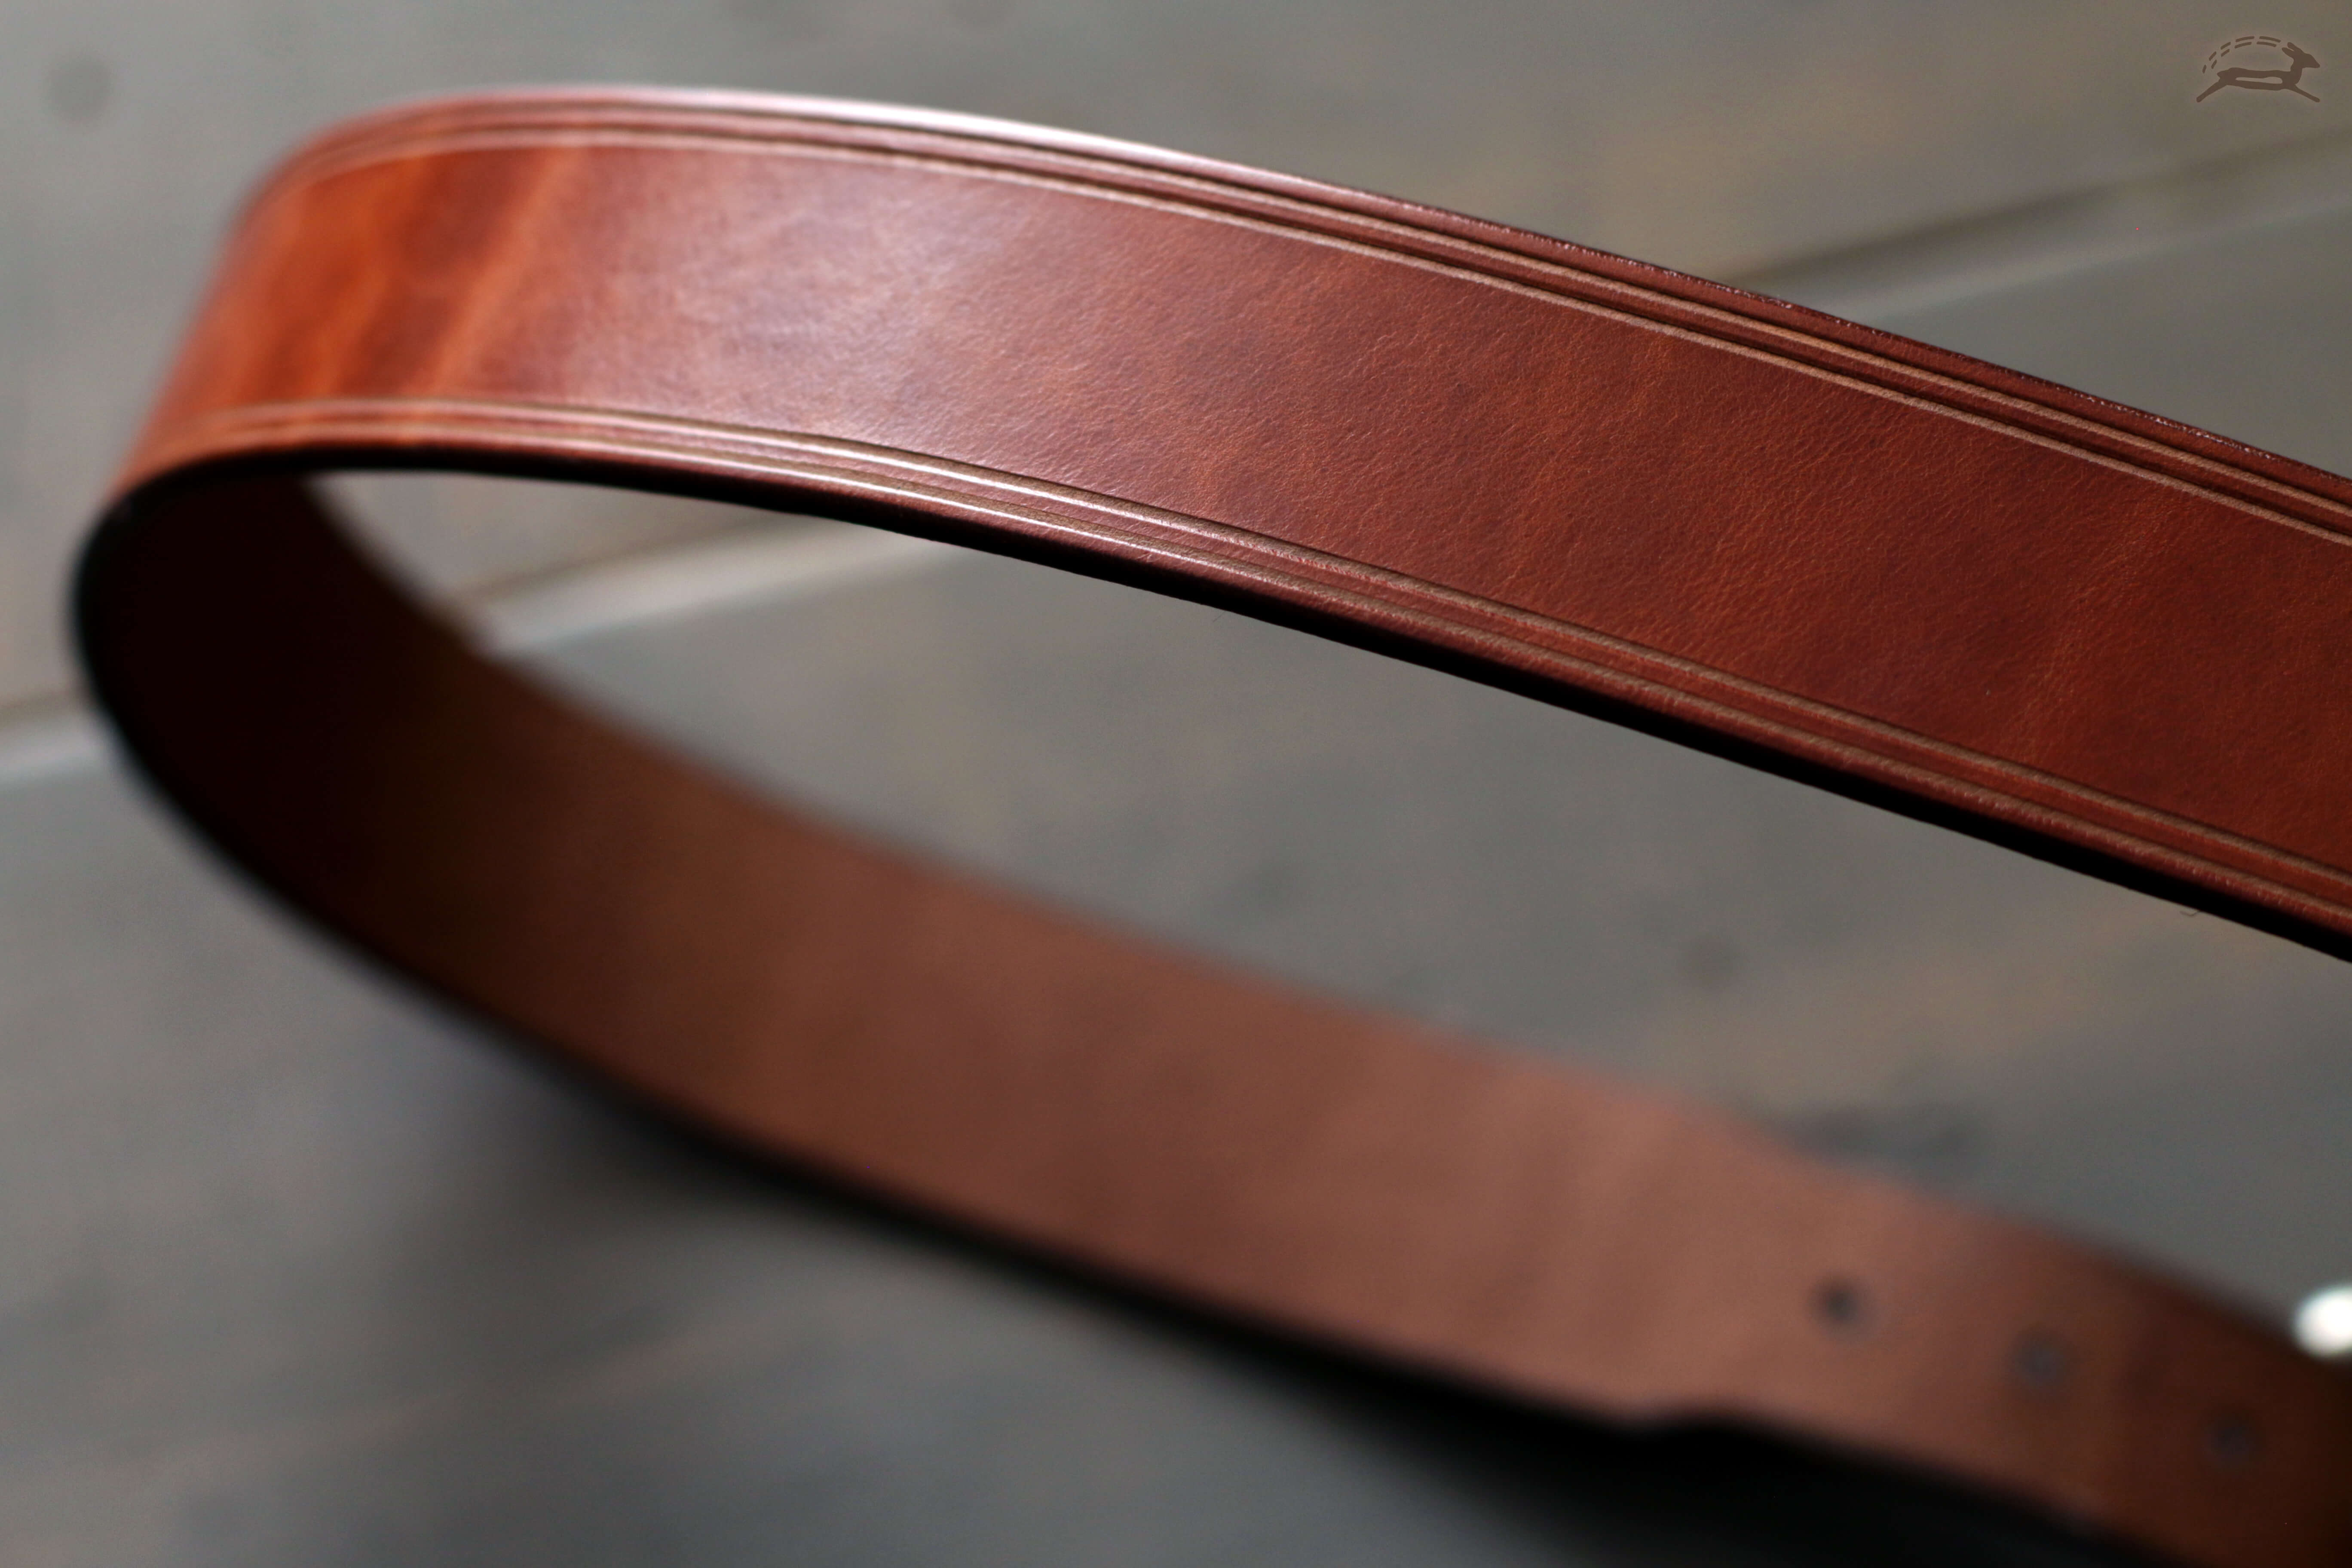 Handmade Leather Belt Harness Leather - OCHRE handcrafted